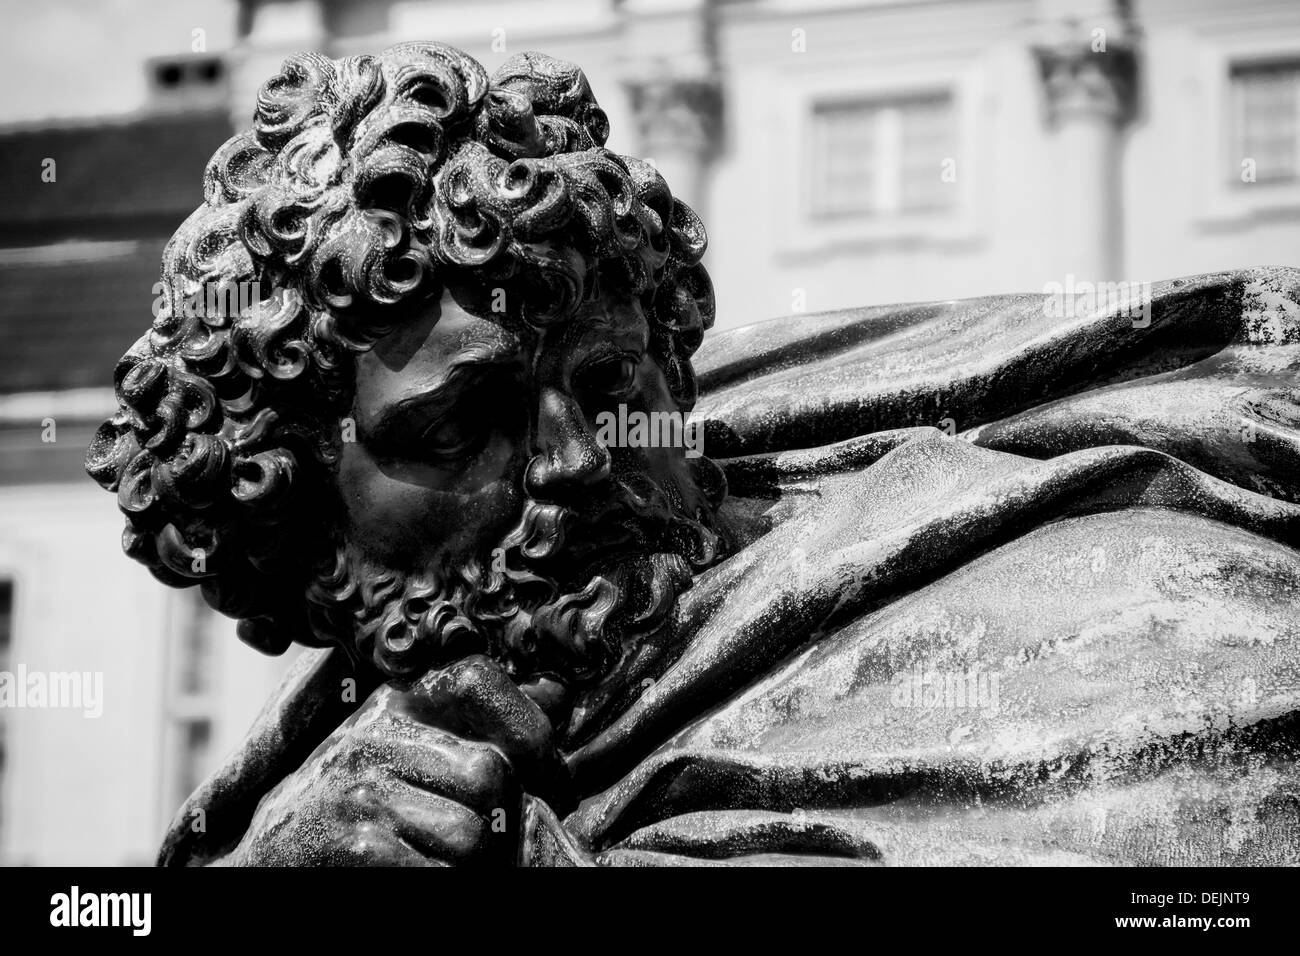 Fragment of old bronze sculpture. Head. Black and White Stock Photo